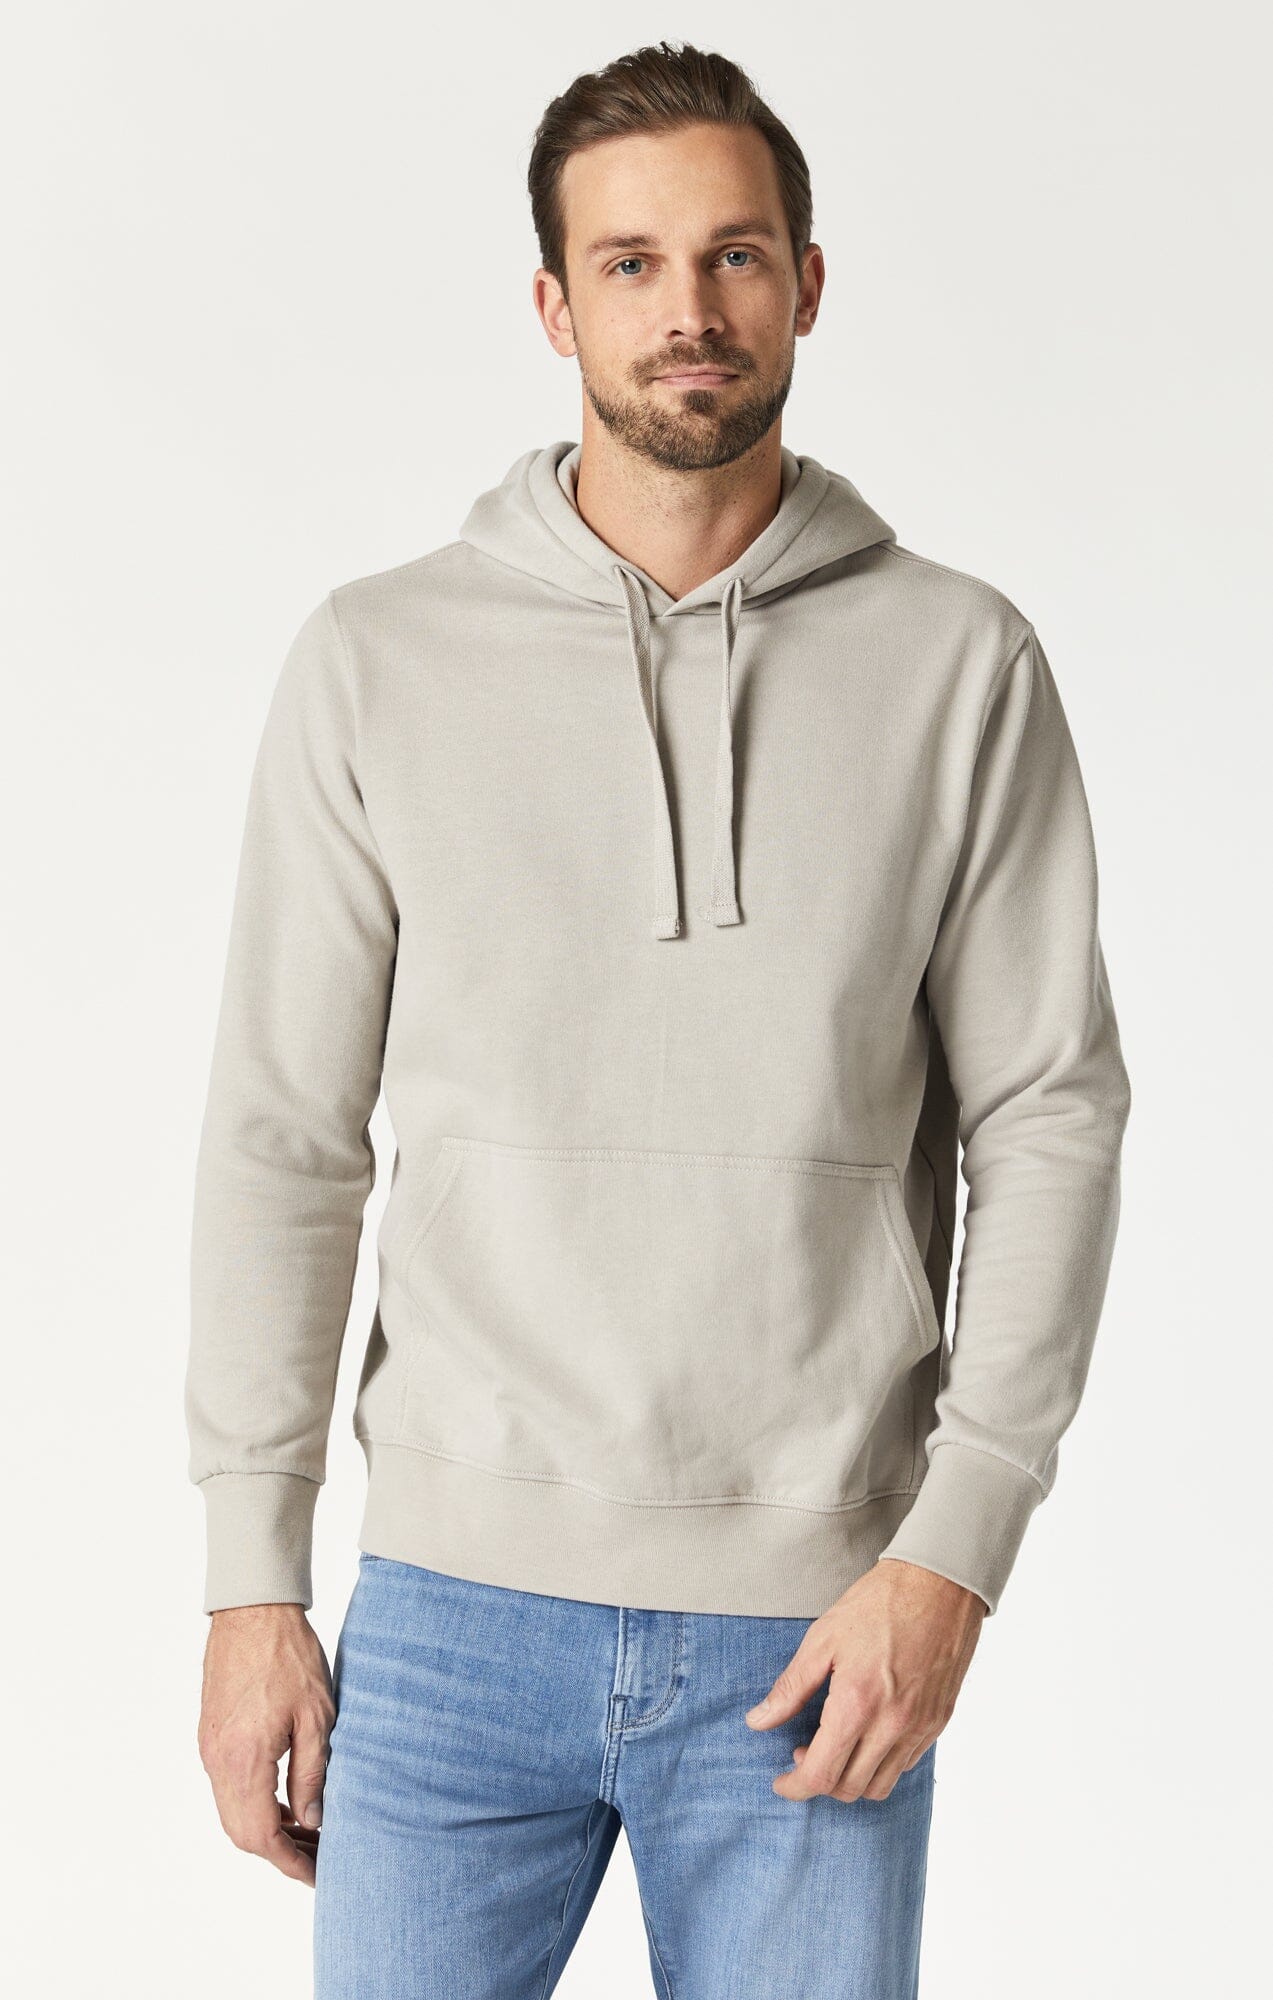 Men's Natural Dyed Sweatshirt In Silver Lining